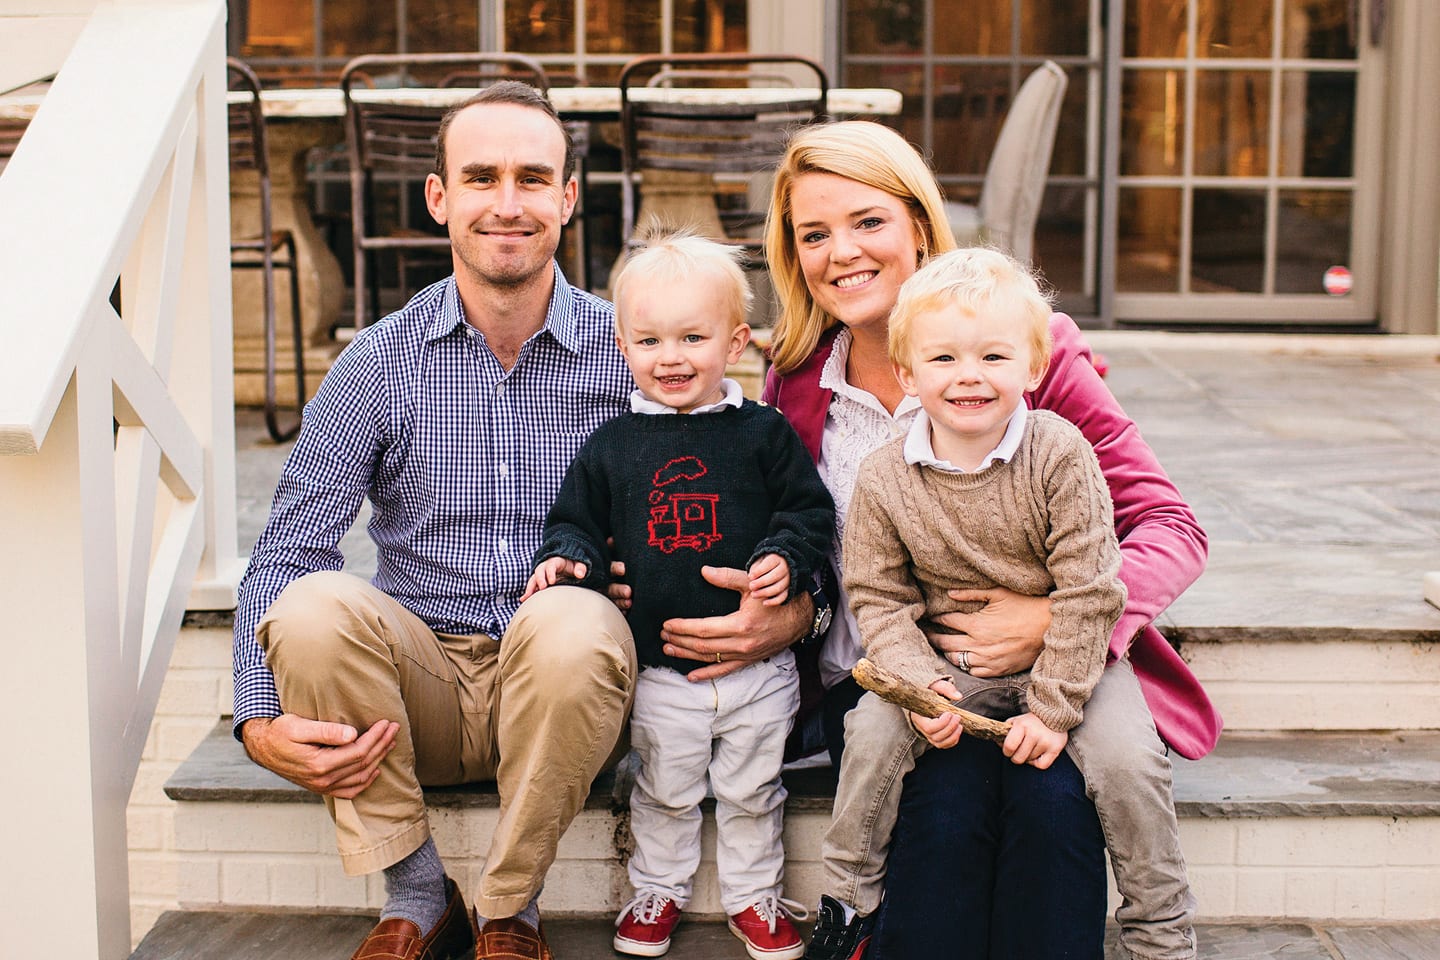 Katherine Currin and happy family in Chattanooga